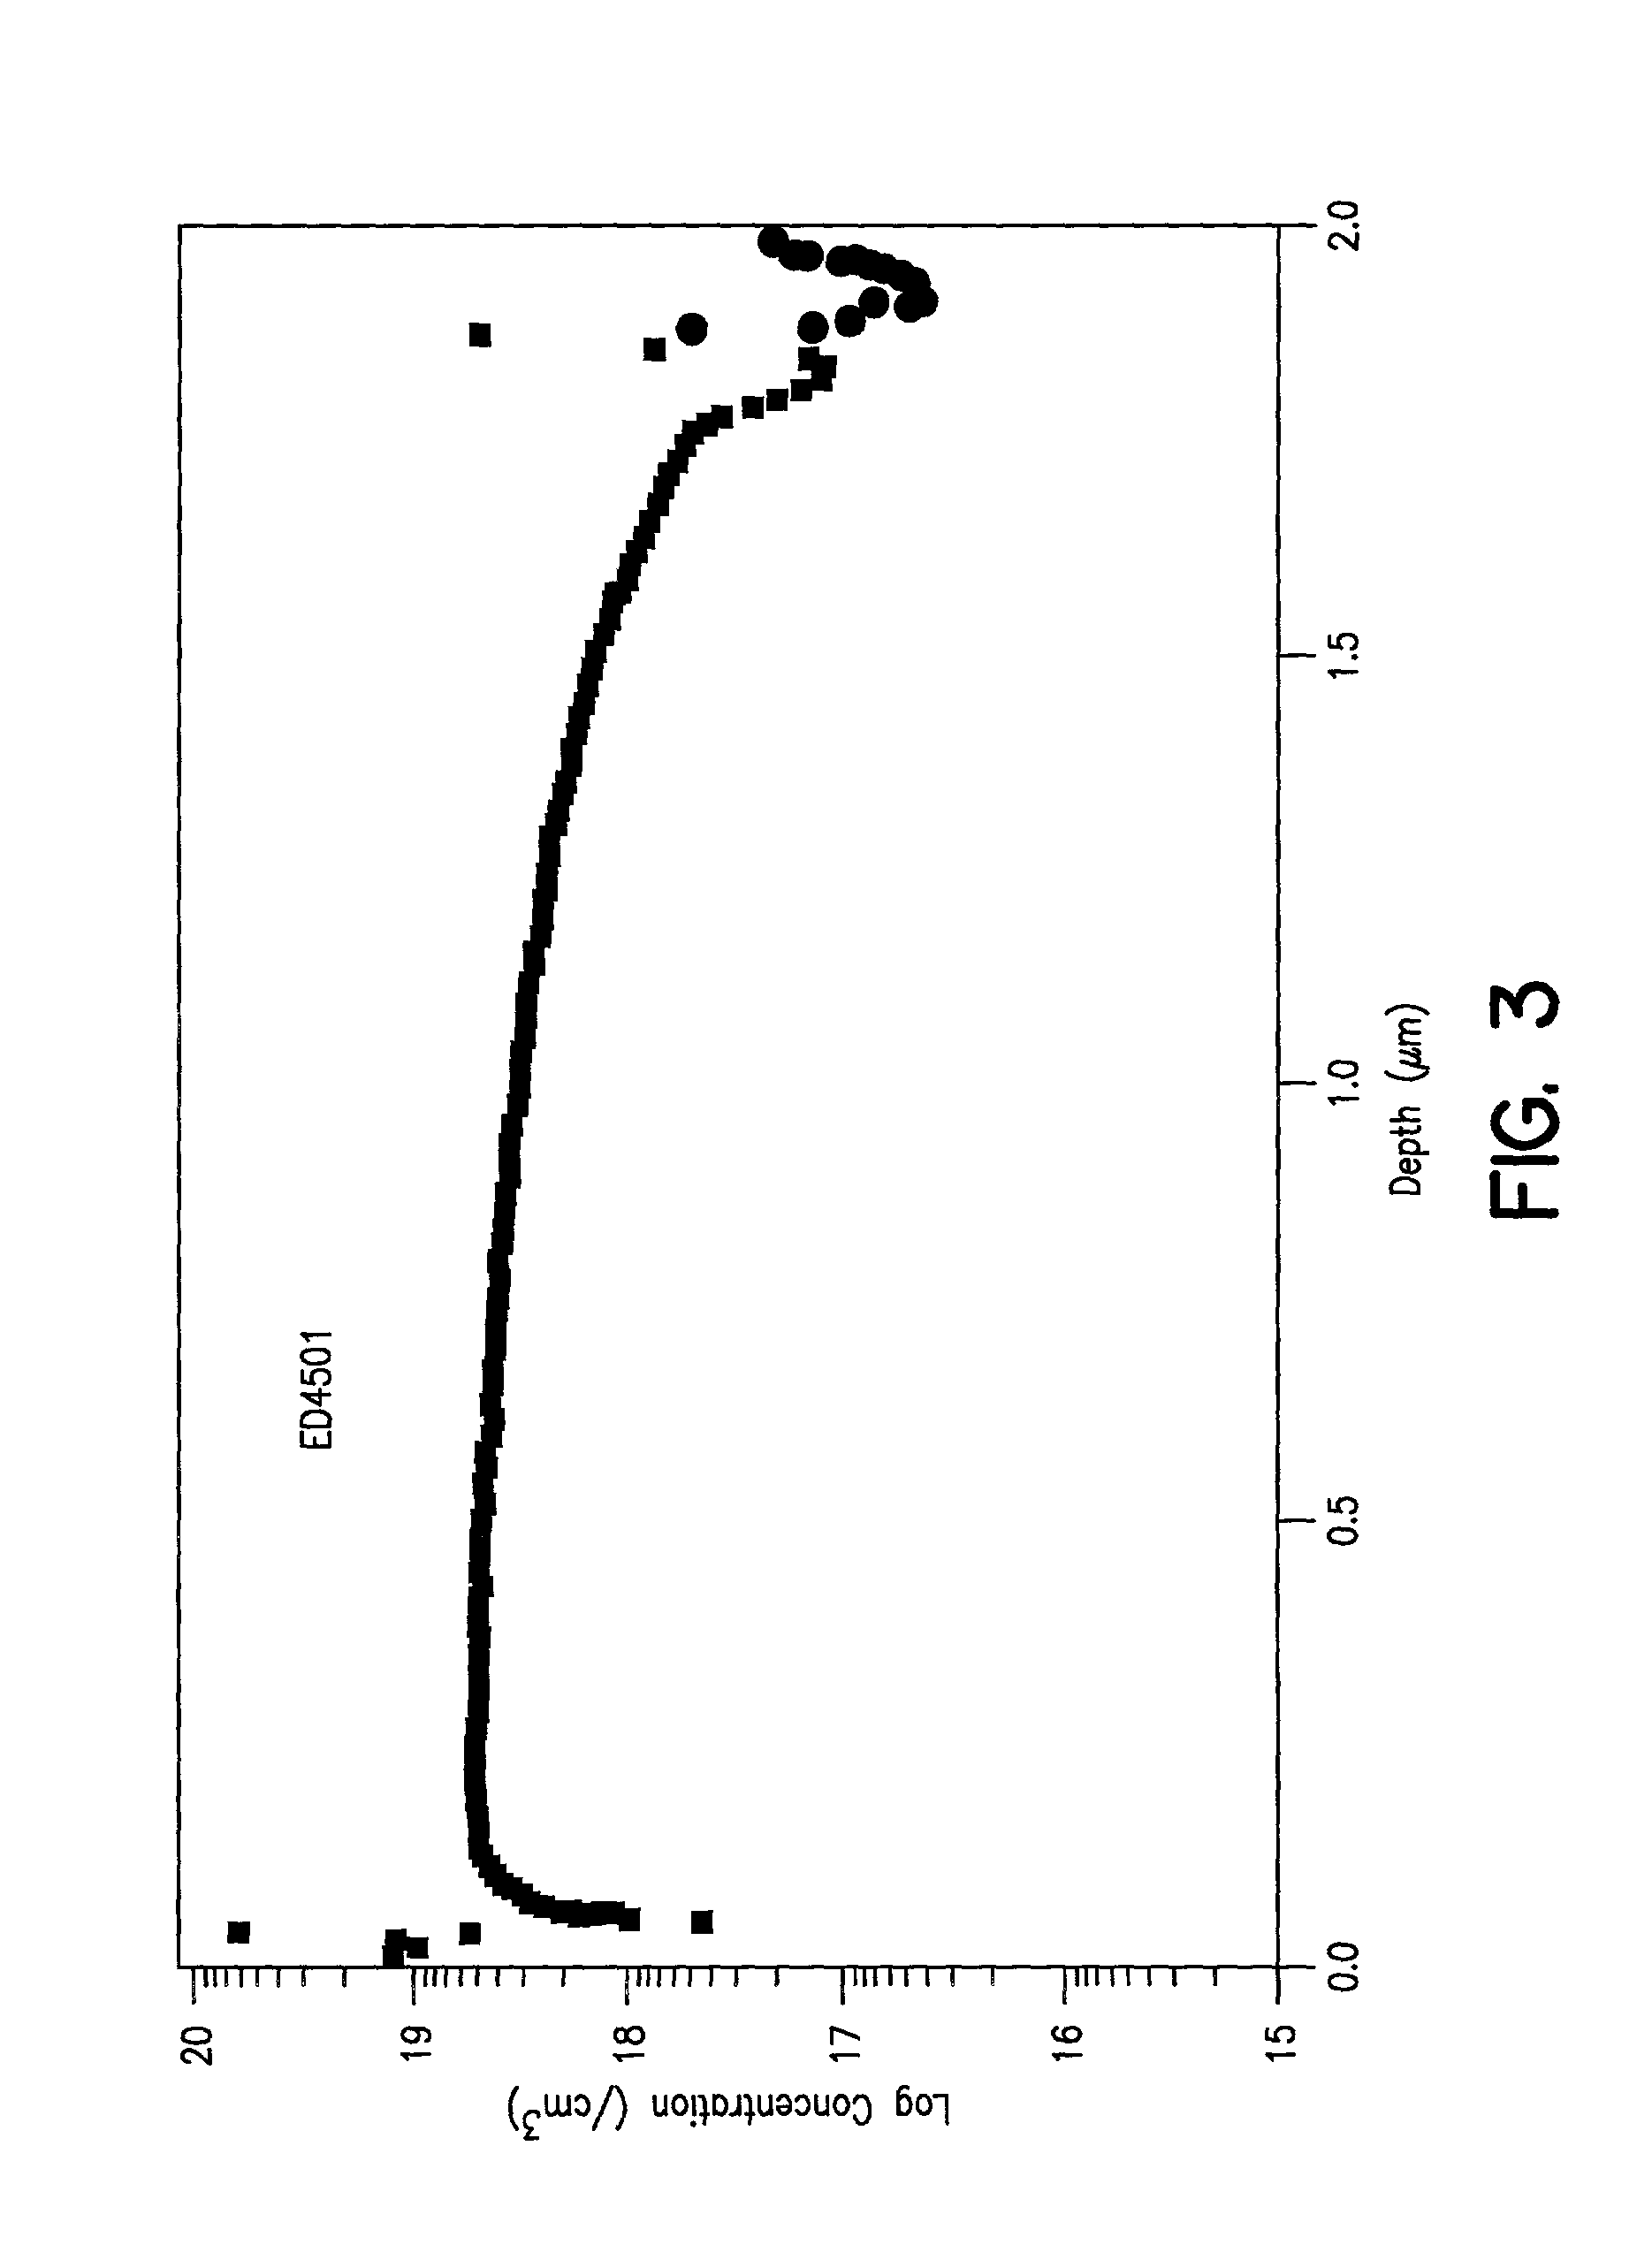 Apparatus and method for optimizing the efficiency of germanium junctions in multi-junction solar cells